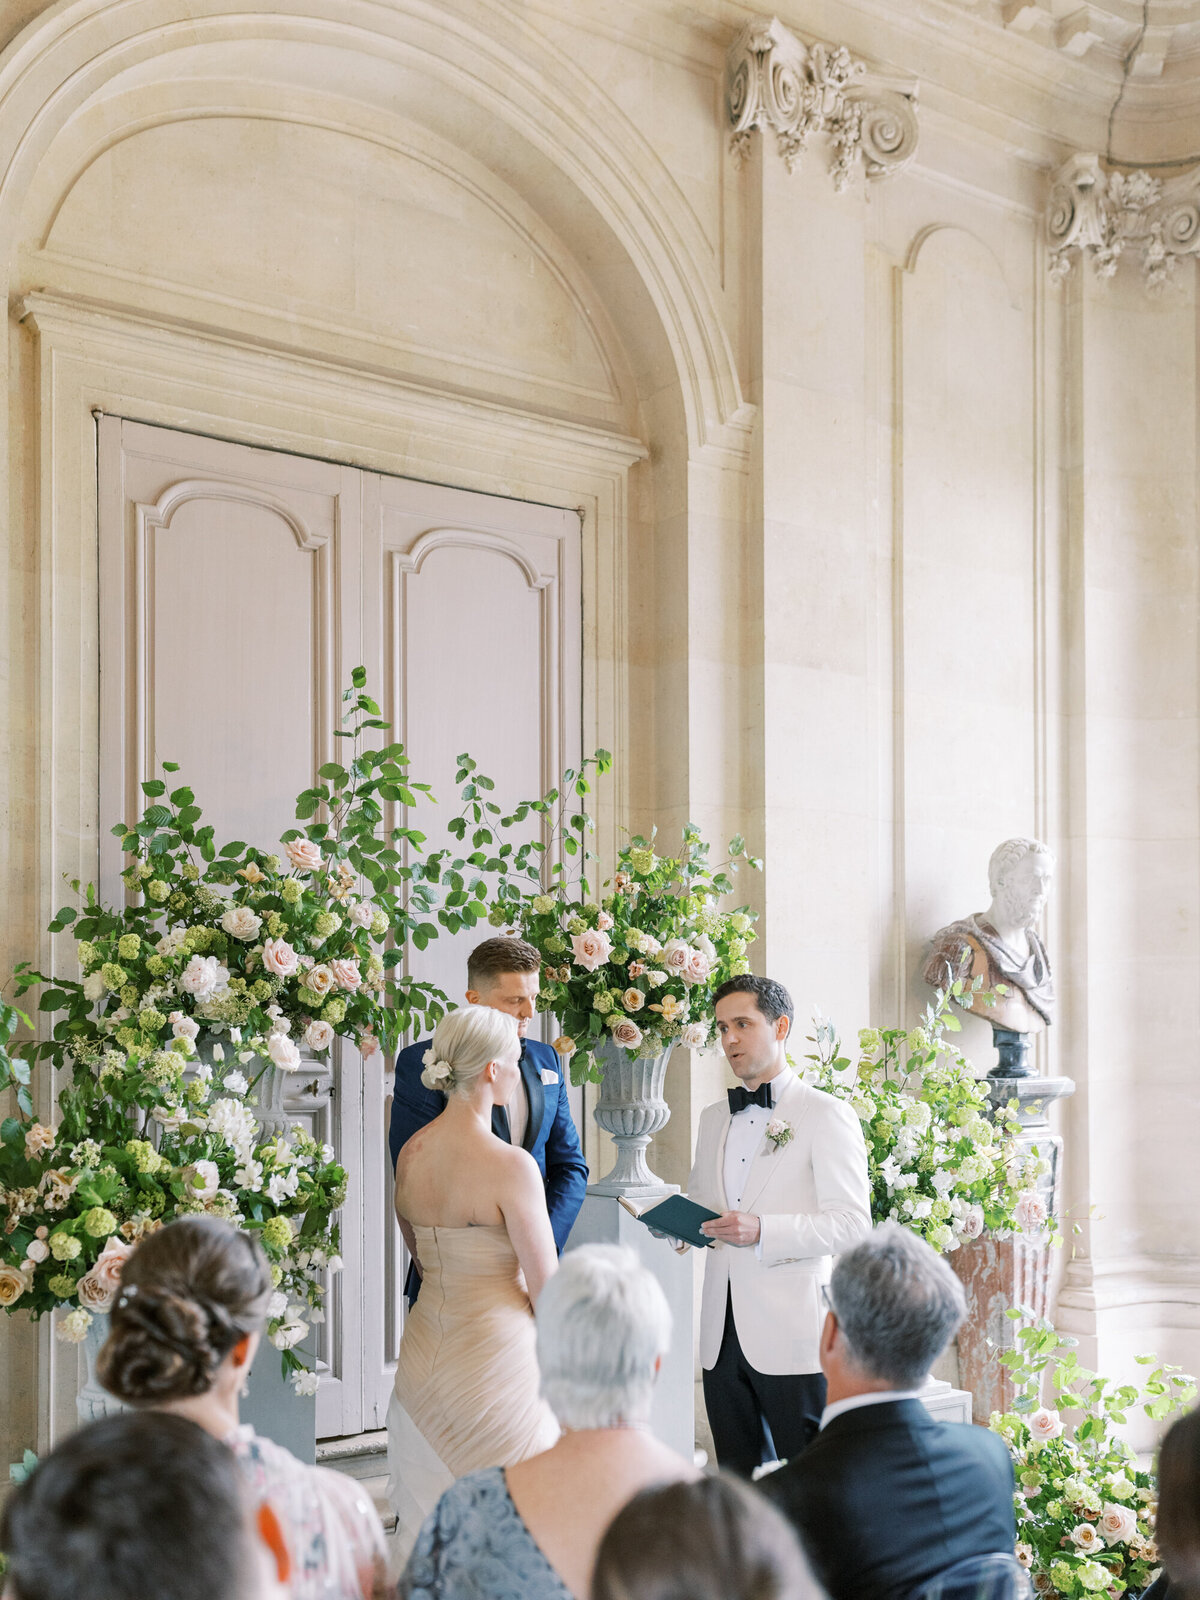 Jennifer Fox Weddings English speaking wedding planning & design agency in France crafting refined and bespoke weddings and celebrations Provence, Paris and destination Laurel-Chris-Chateau-de-Champlatreaux-Molly-Carr-Photography-66